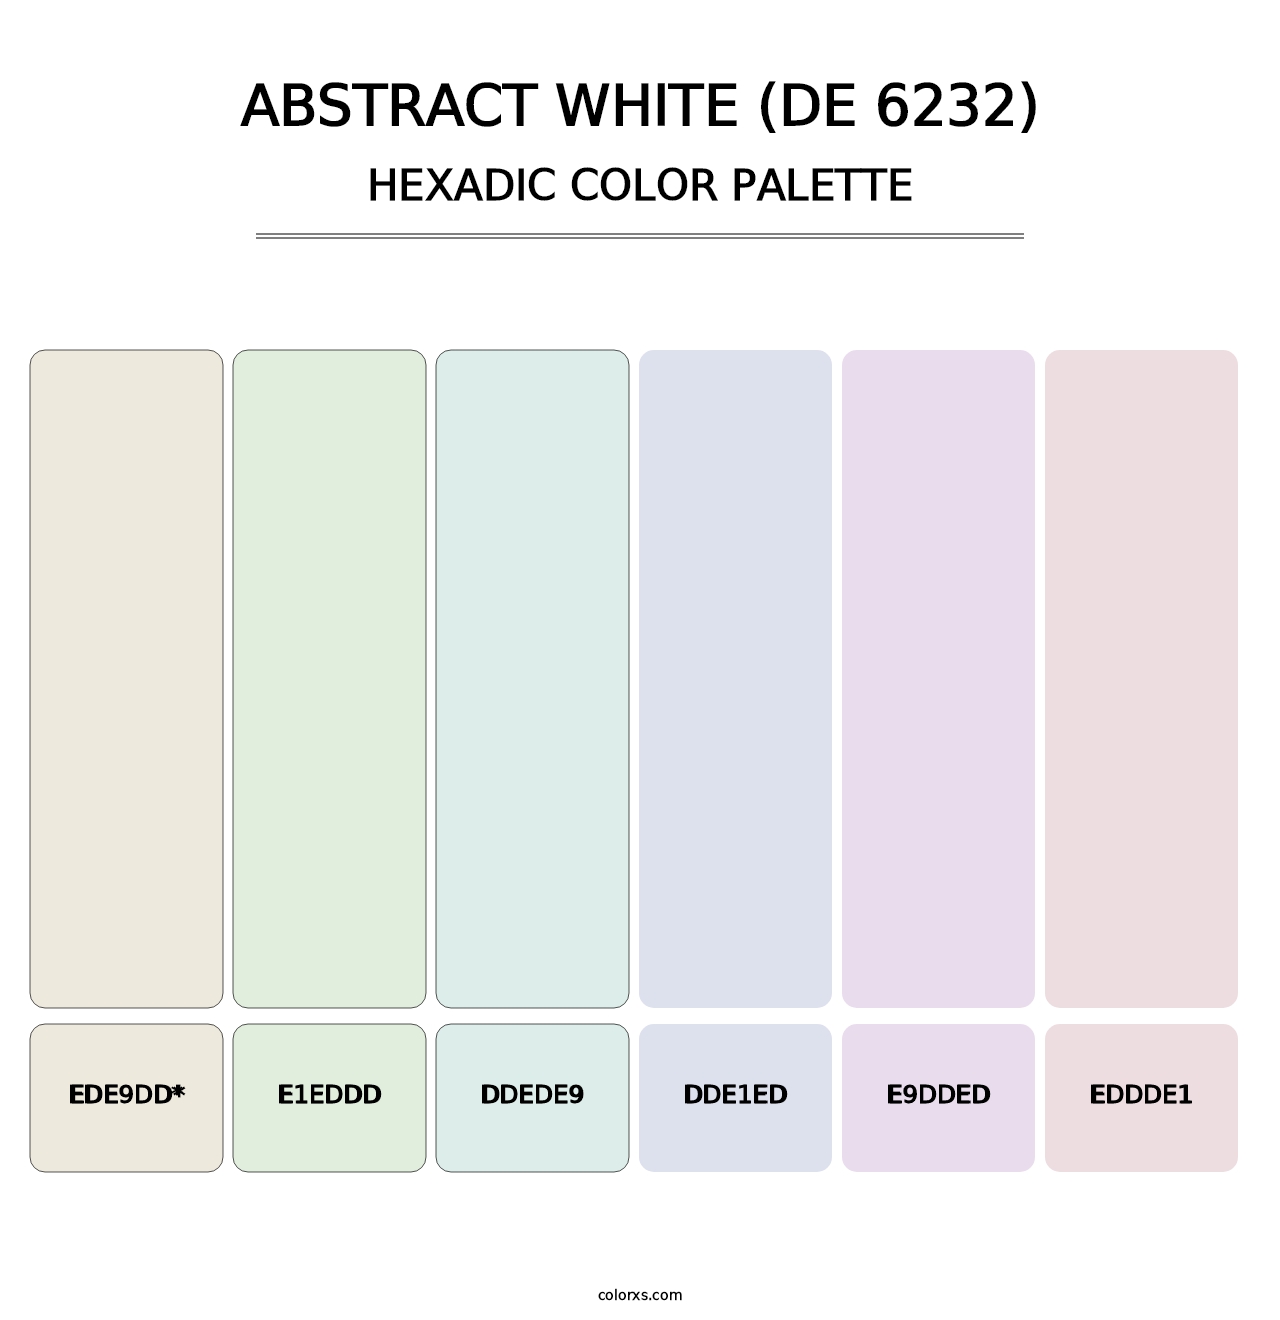 Abstract White (DE 6232) - Hexadic Color Palette